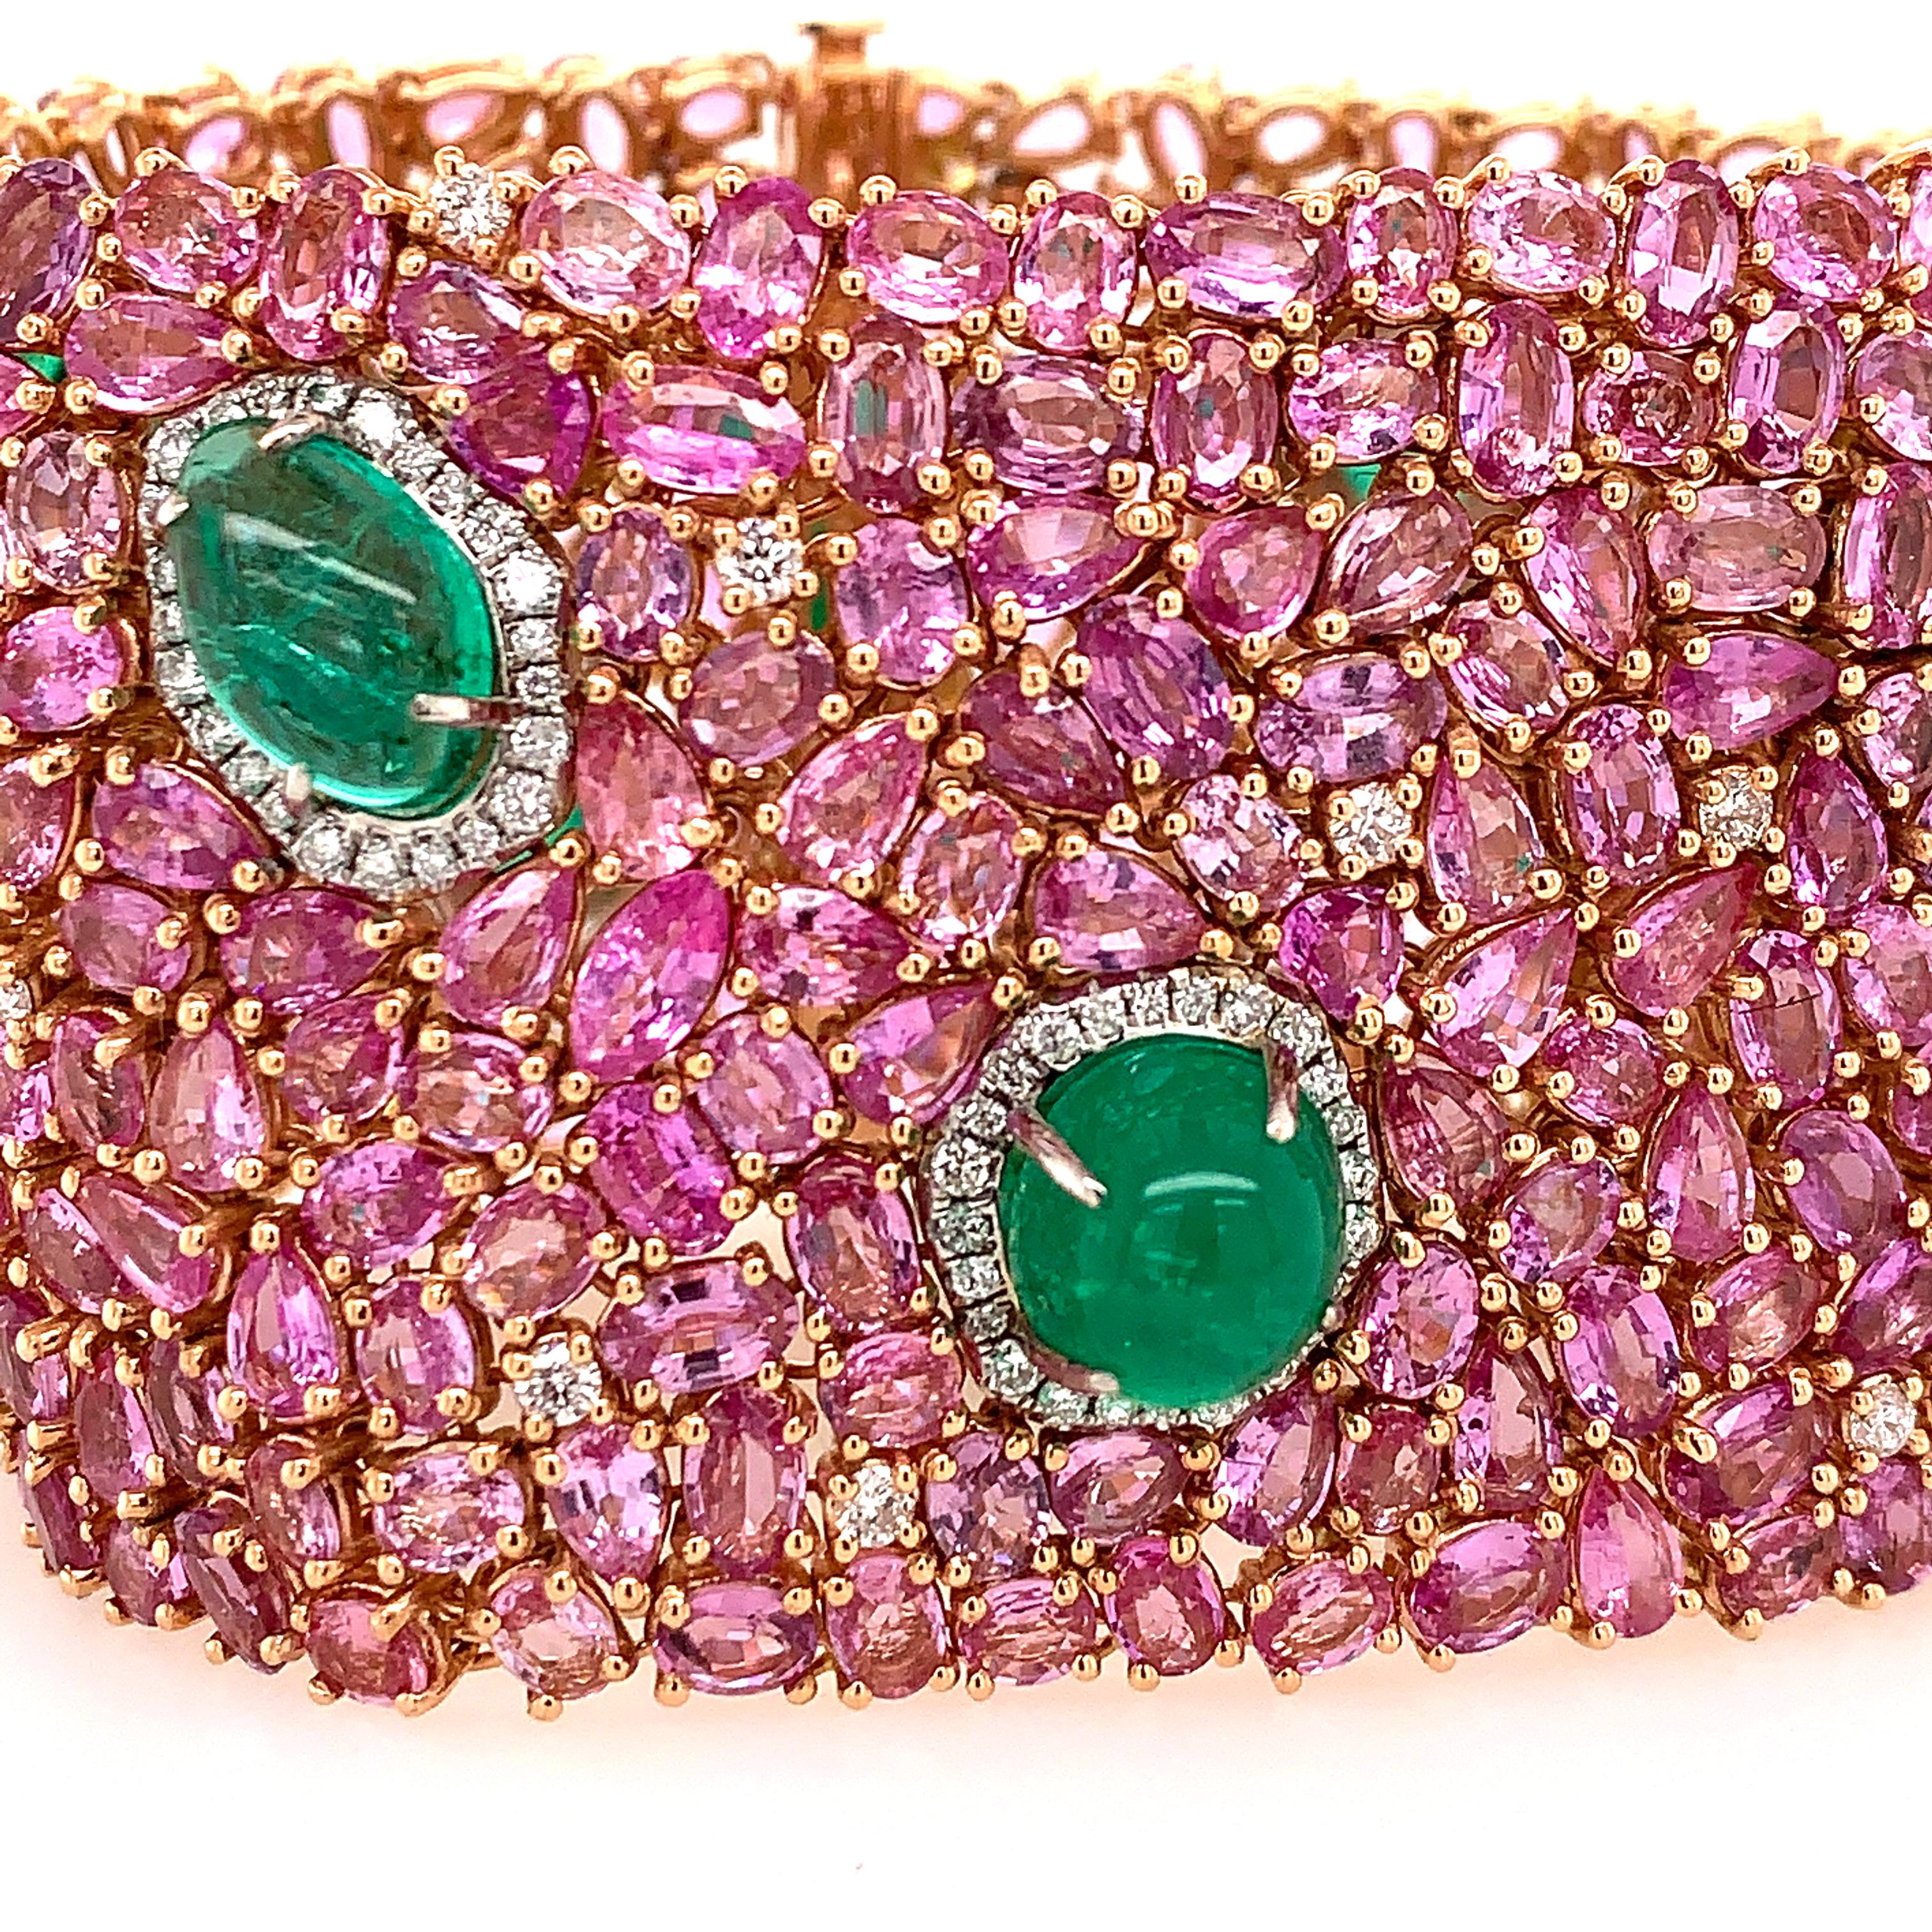 18K Rose Gold
Pink Sapphires:78.27ct total weight. 
Emeralds: 21.26ct total weight. 
Diamonds: 1.72ct total weight.
All diamonds are G-H/SI stones.